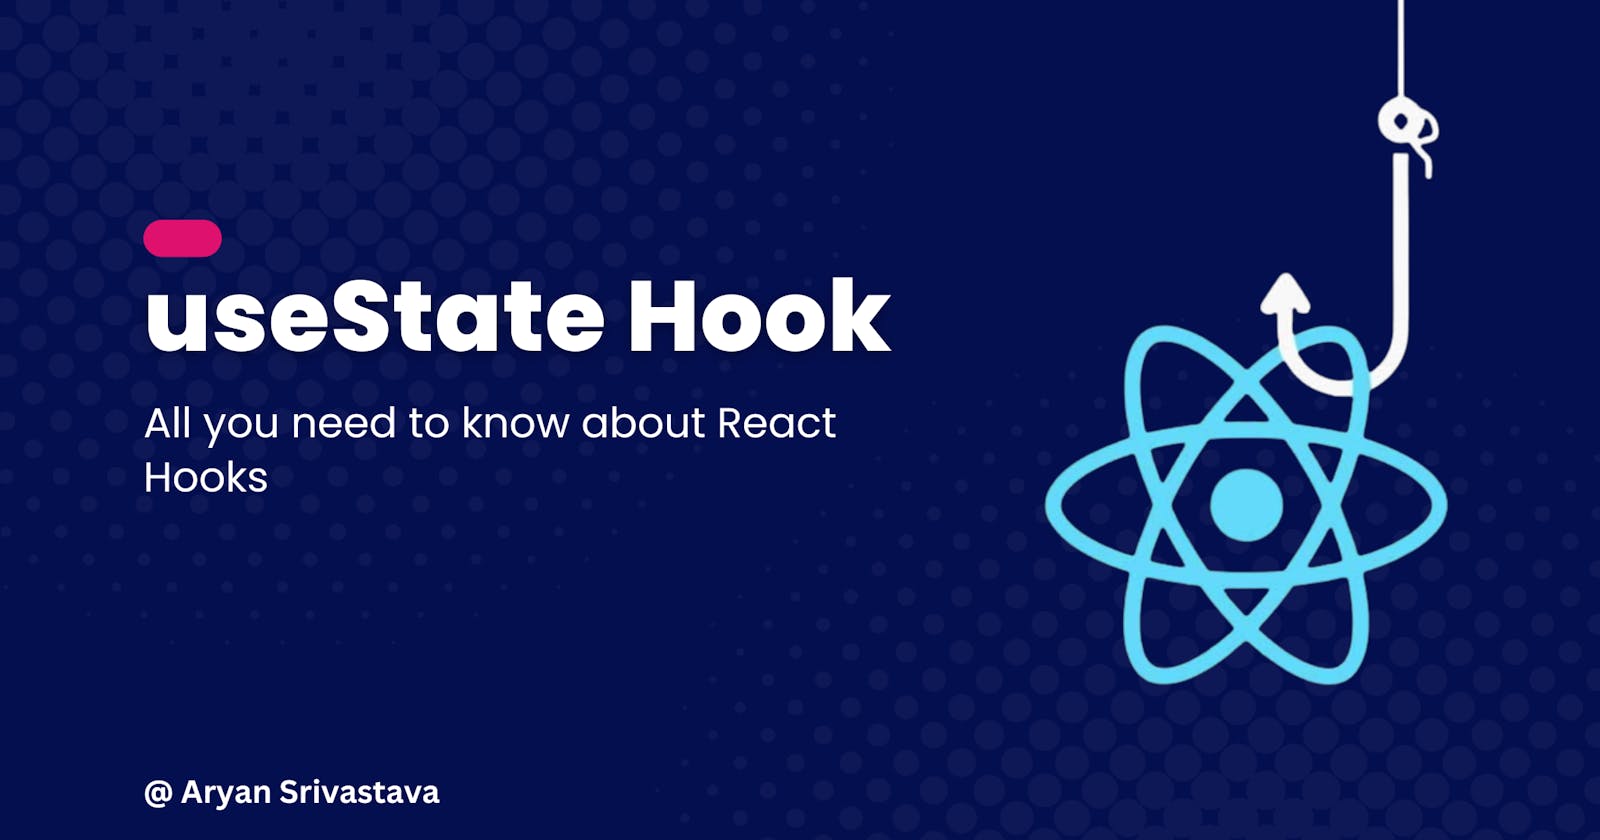 All you need to know about React Hooks: useState